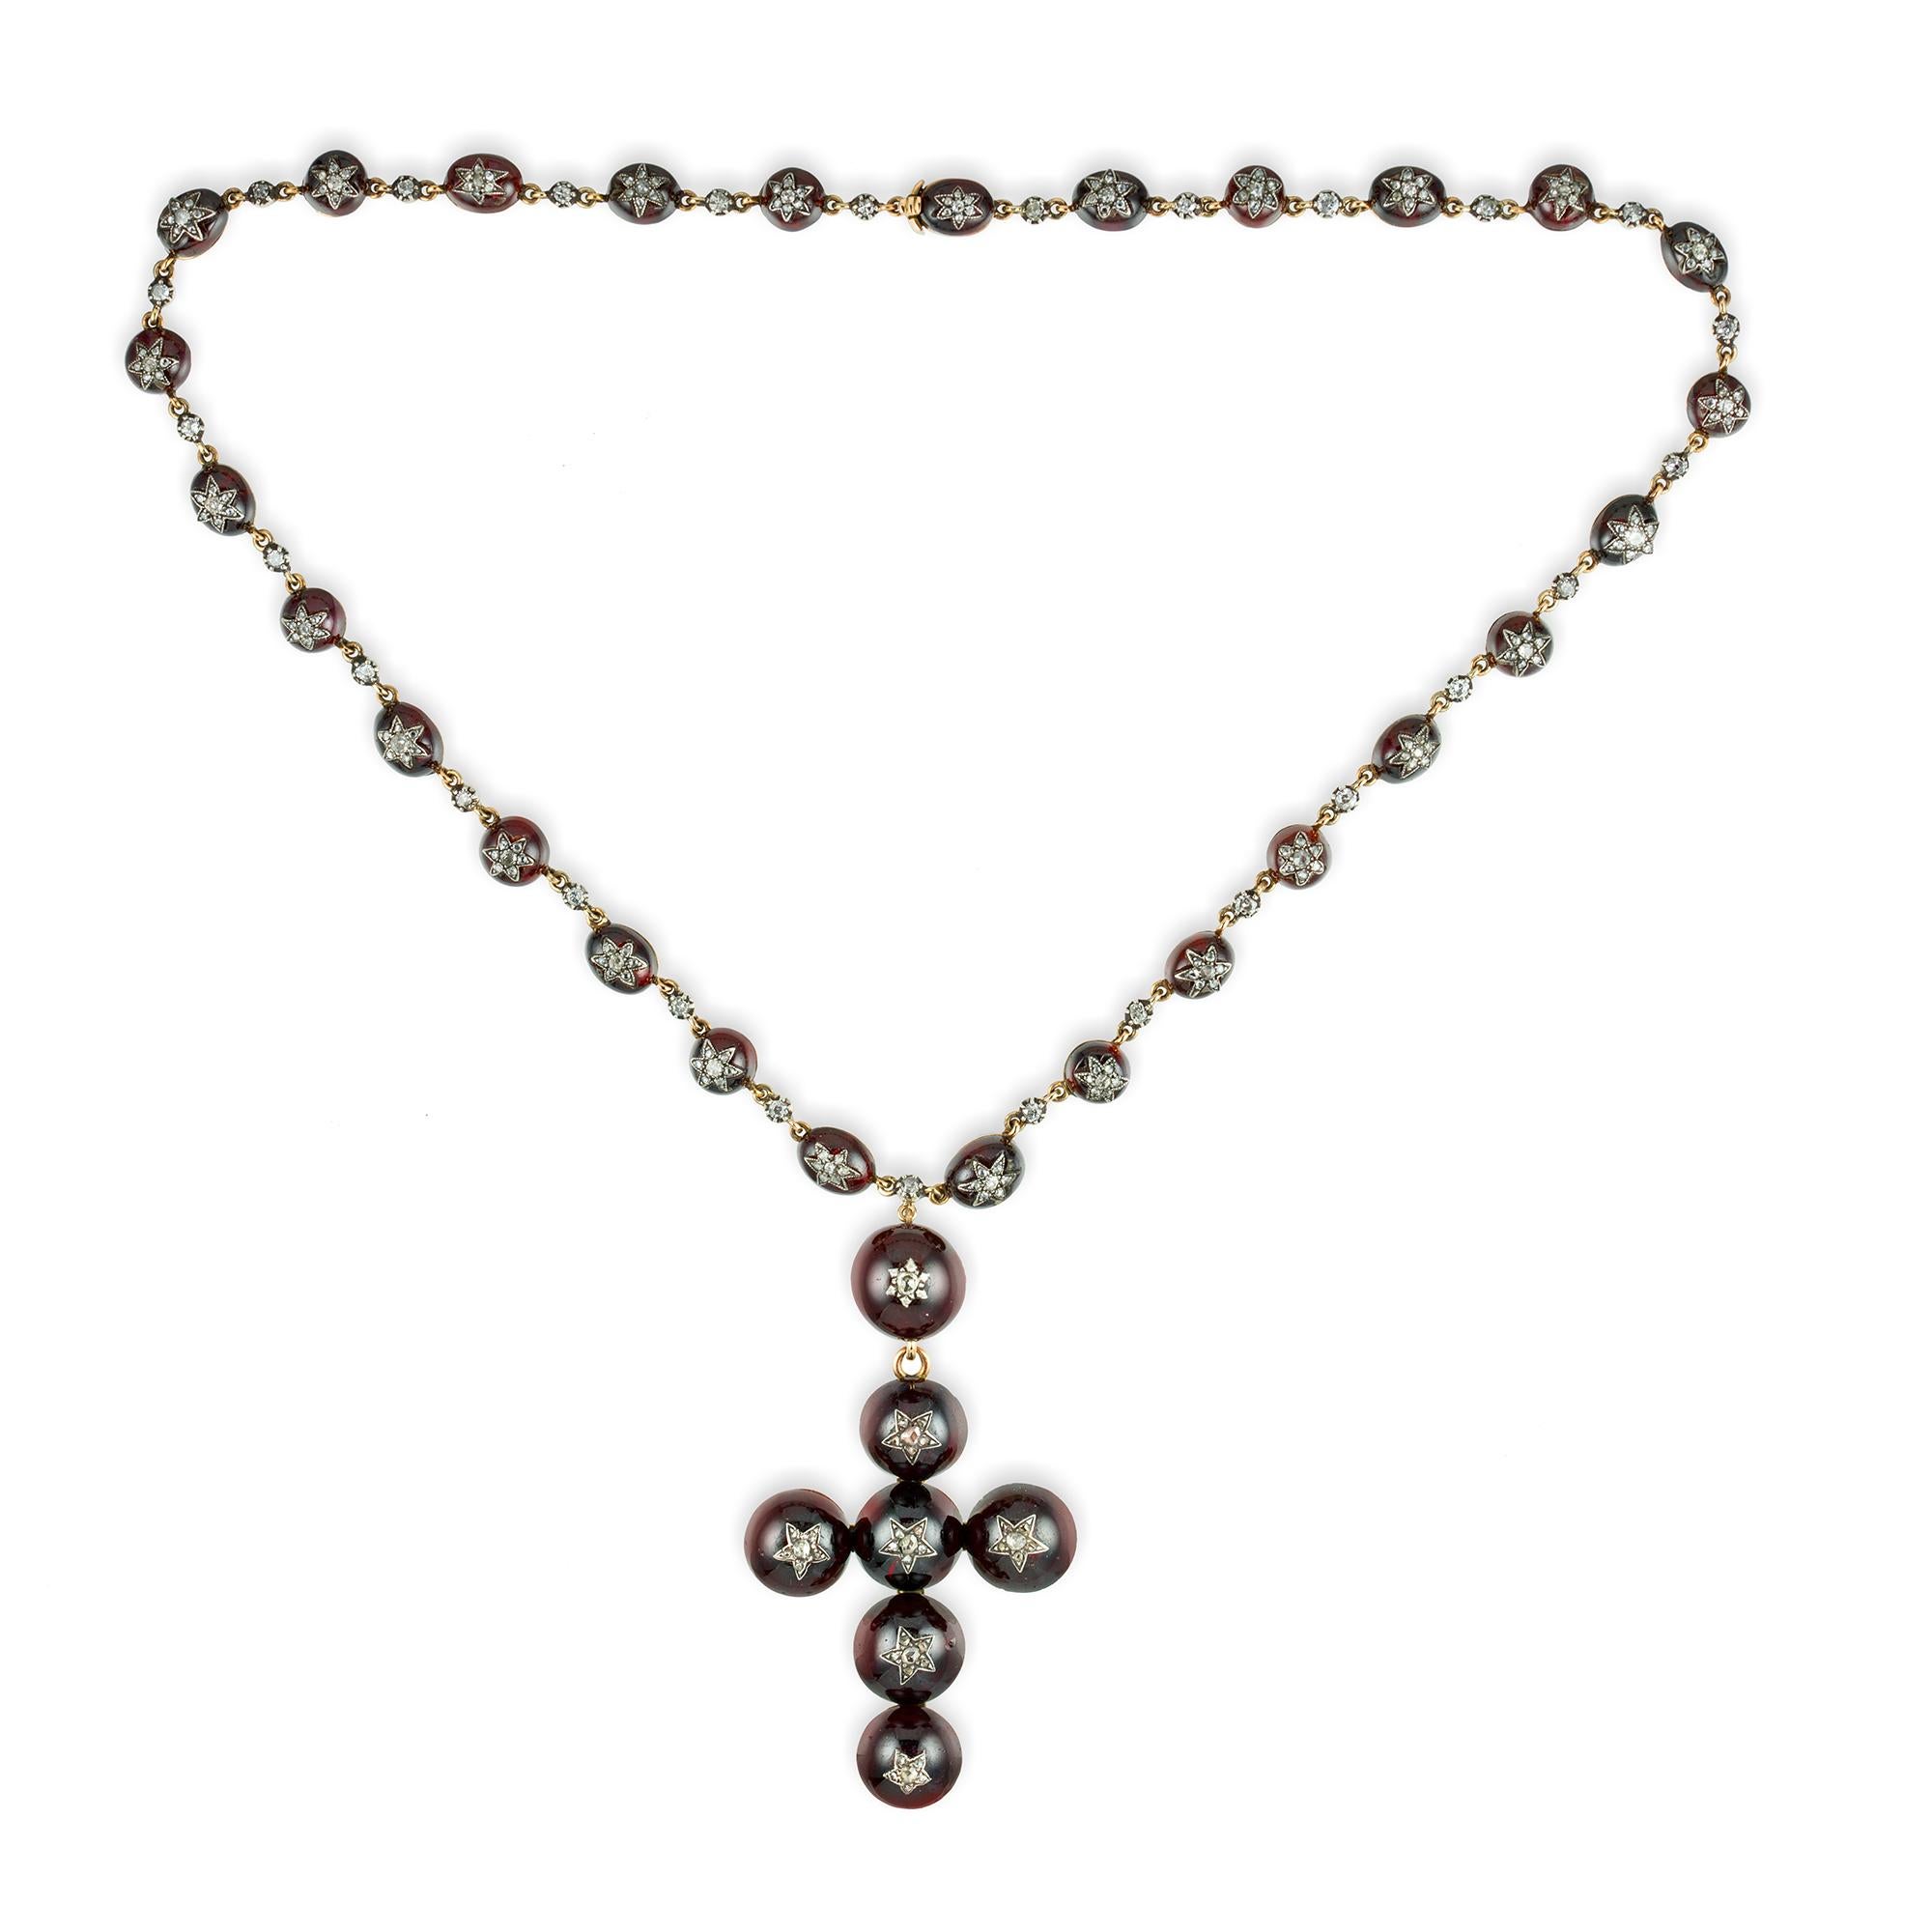 A Victorian garnet and diamond cross necklace, the cross pendant consisted of six circular cabochon garnets applyed with old- and rose-cut diamond-set stars to the centres, suspended from a larger circular top of similar design, all attached to a